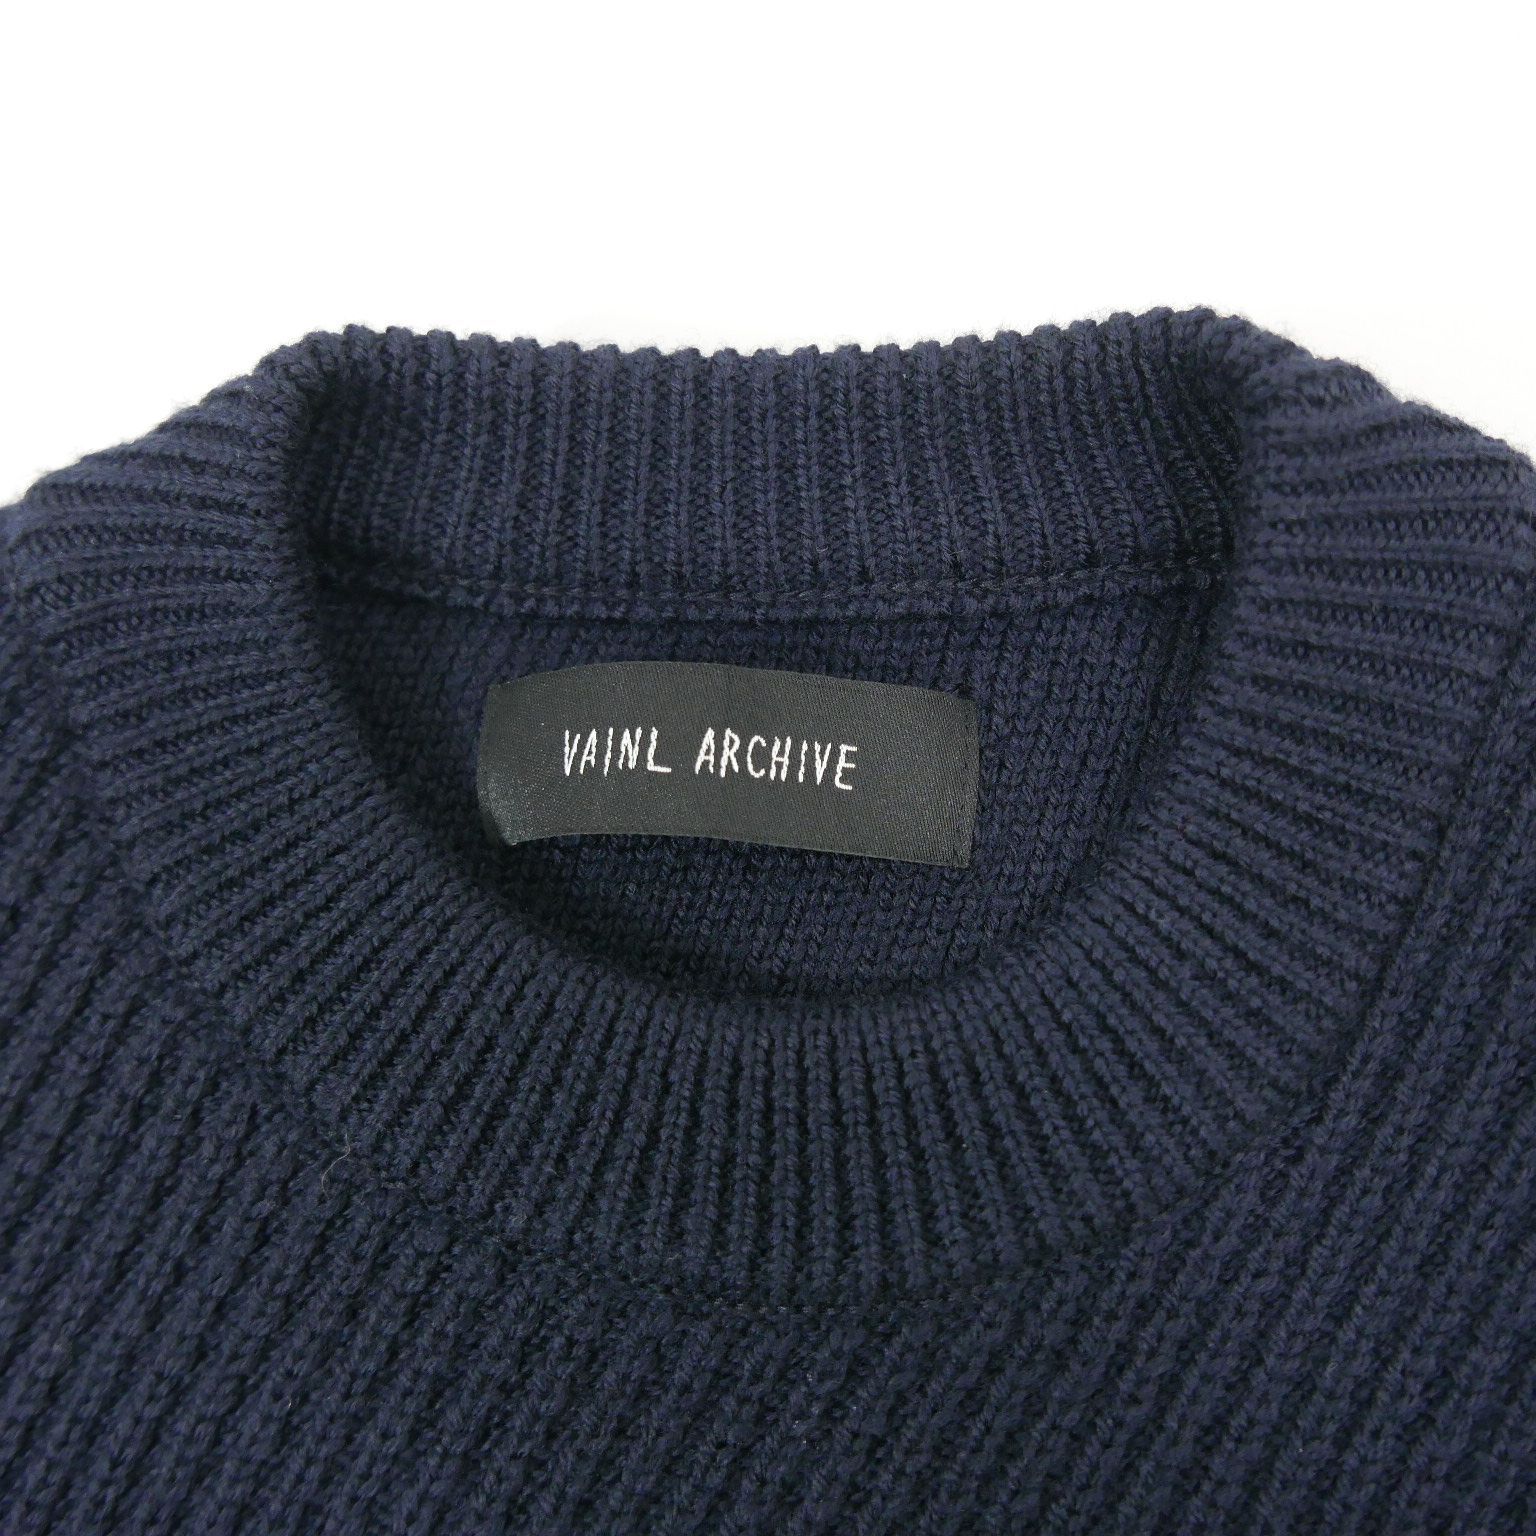 19AW 19FW VAINL ARCHIVE ヴァイナル アーカイブ JEFF'S-KNIT ウール 